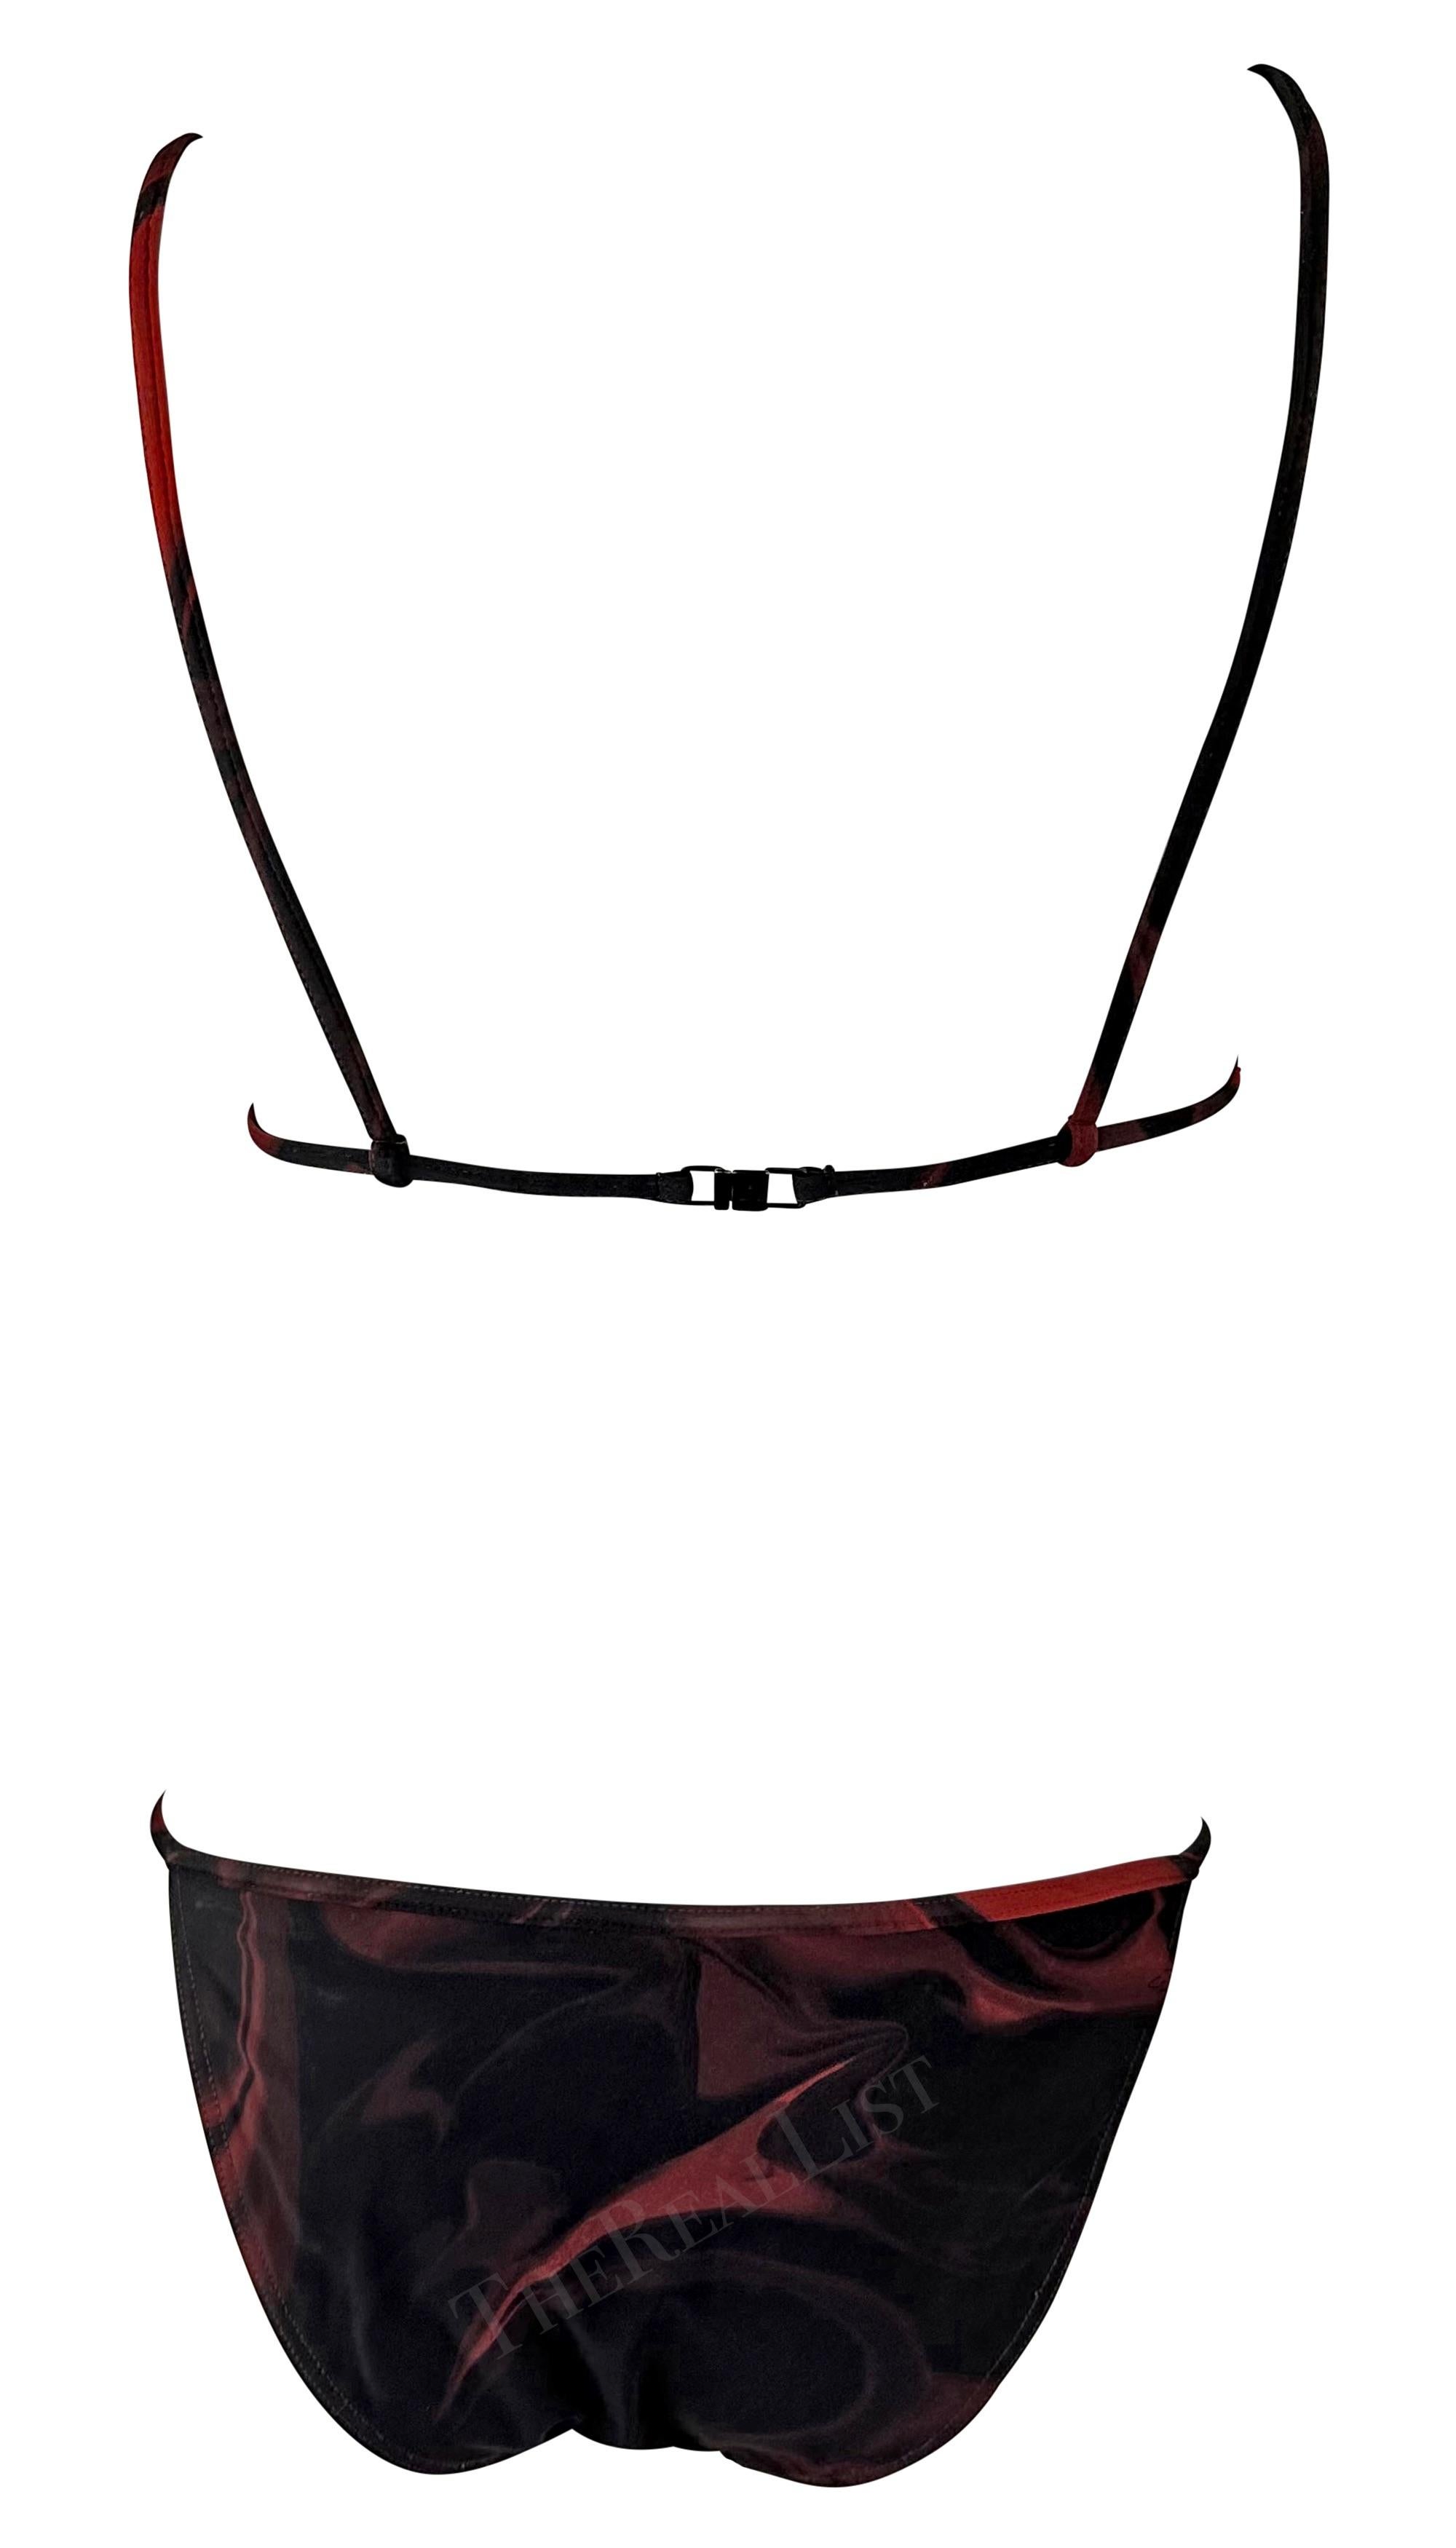 S/S 2001 Gucci by Tom Ford Black Red Magma Print Logo Buckle Bikini Two-Pieces en vente 2